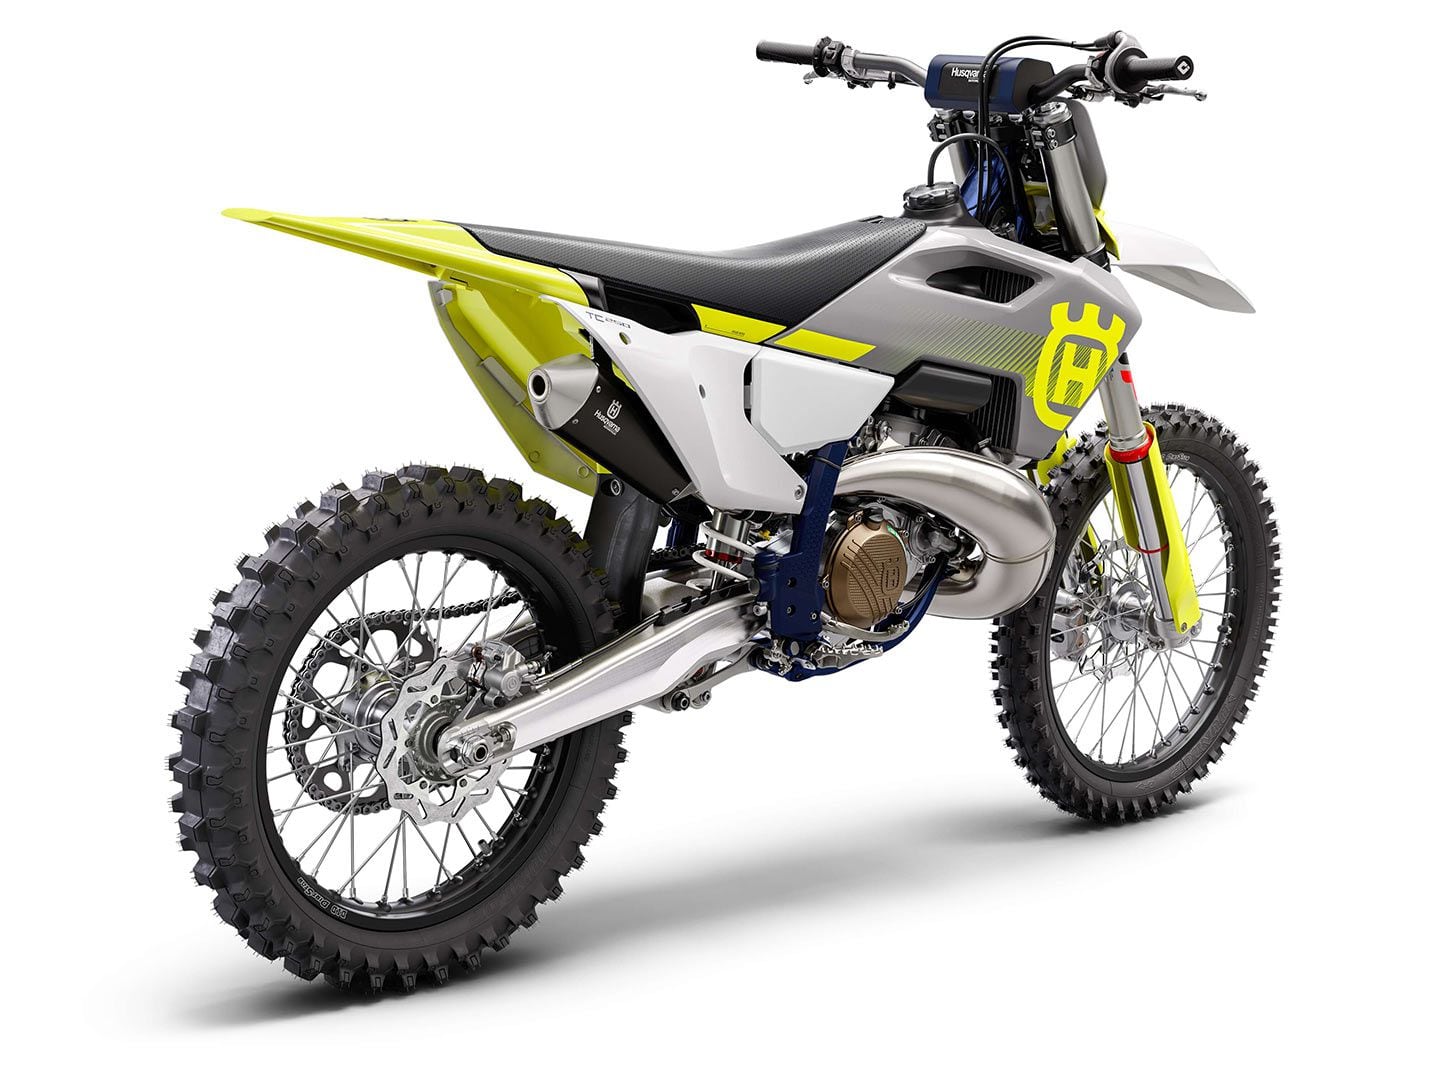 According to Husqvarna, its 250cc two-stroke motocross bike weighs 220 pounds without fuel.